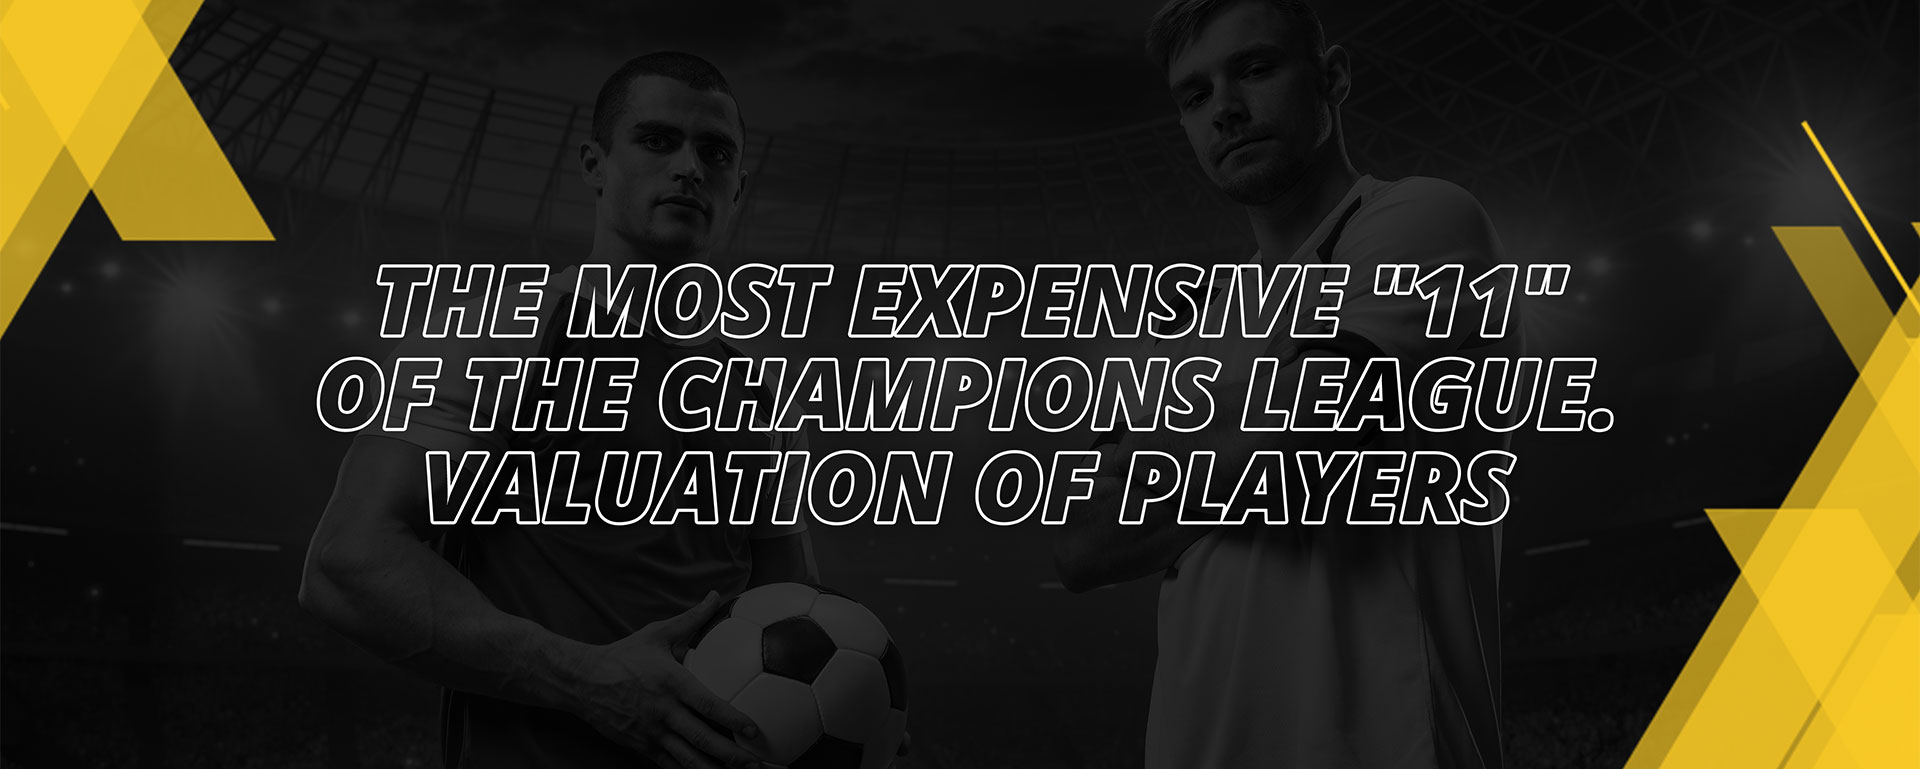 THE MOST EXPENSIVE 11 OF CHAMPIONS LEAGUE – VALUATION OF PLAYER